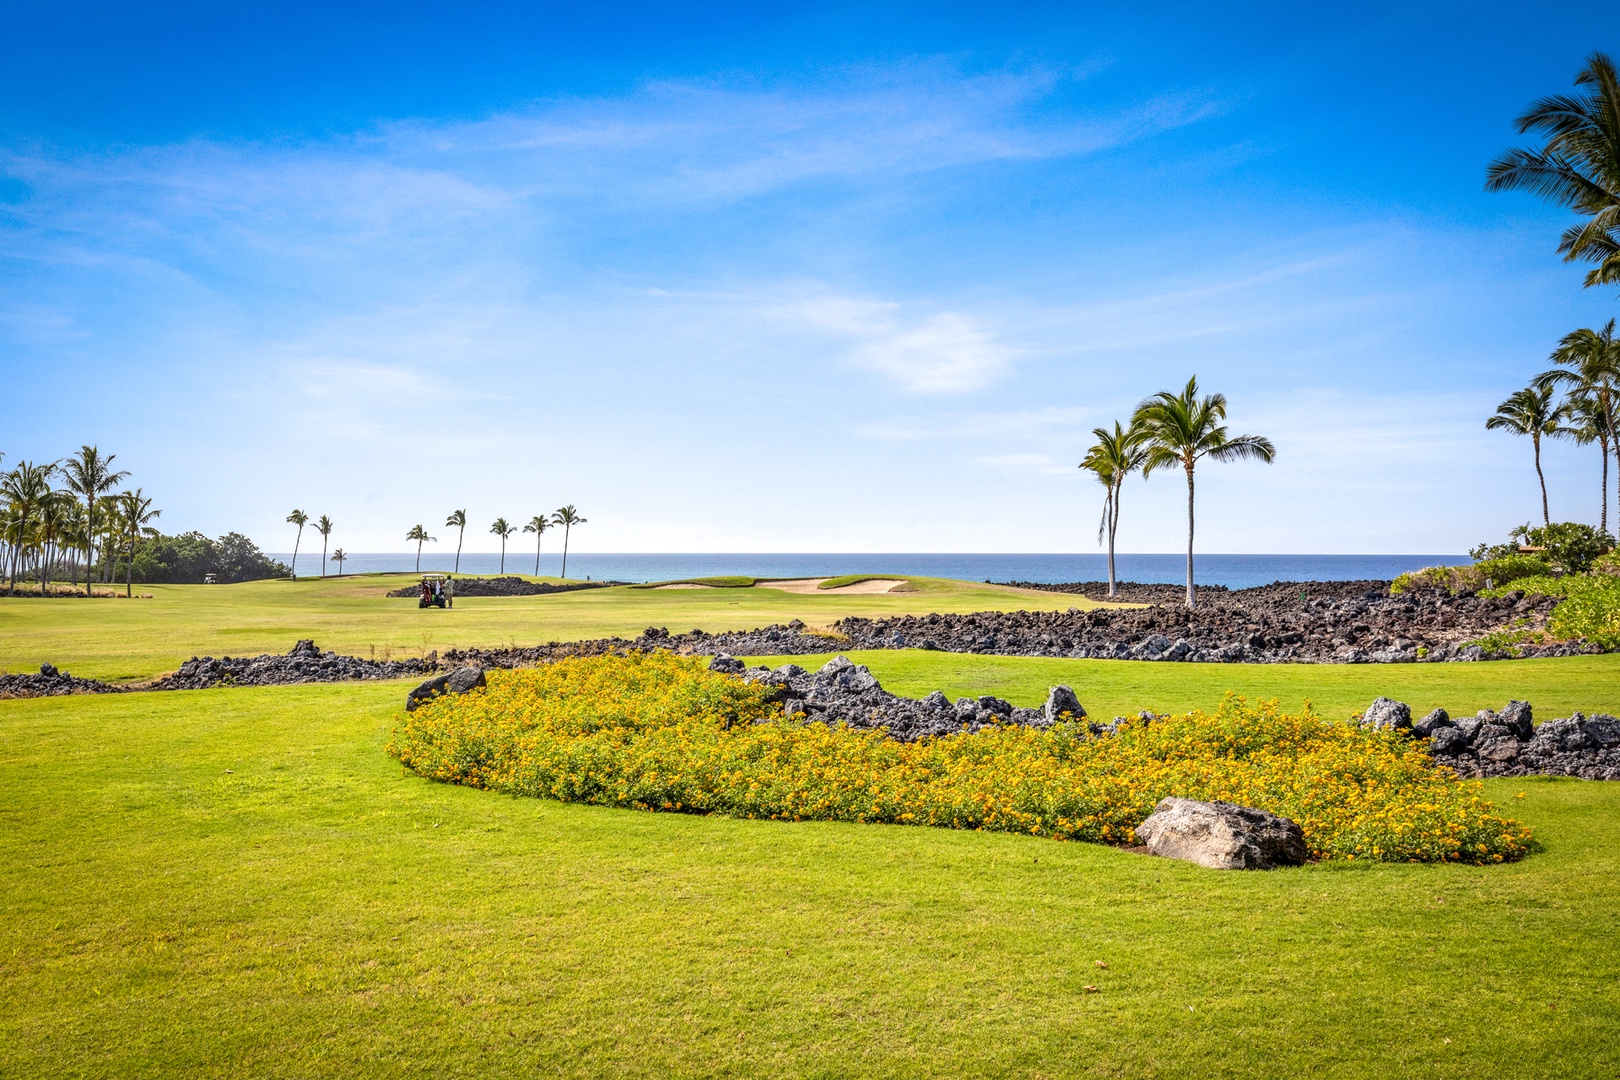 Waikoloa Vacation Rentals, 2BD Hali'i Kai (12C) at Waikoloa Resort - Your private lanai steps out to a grassy lawn, perfect for small children and anyone who appreciates extra outdoor space.